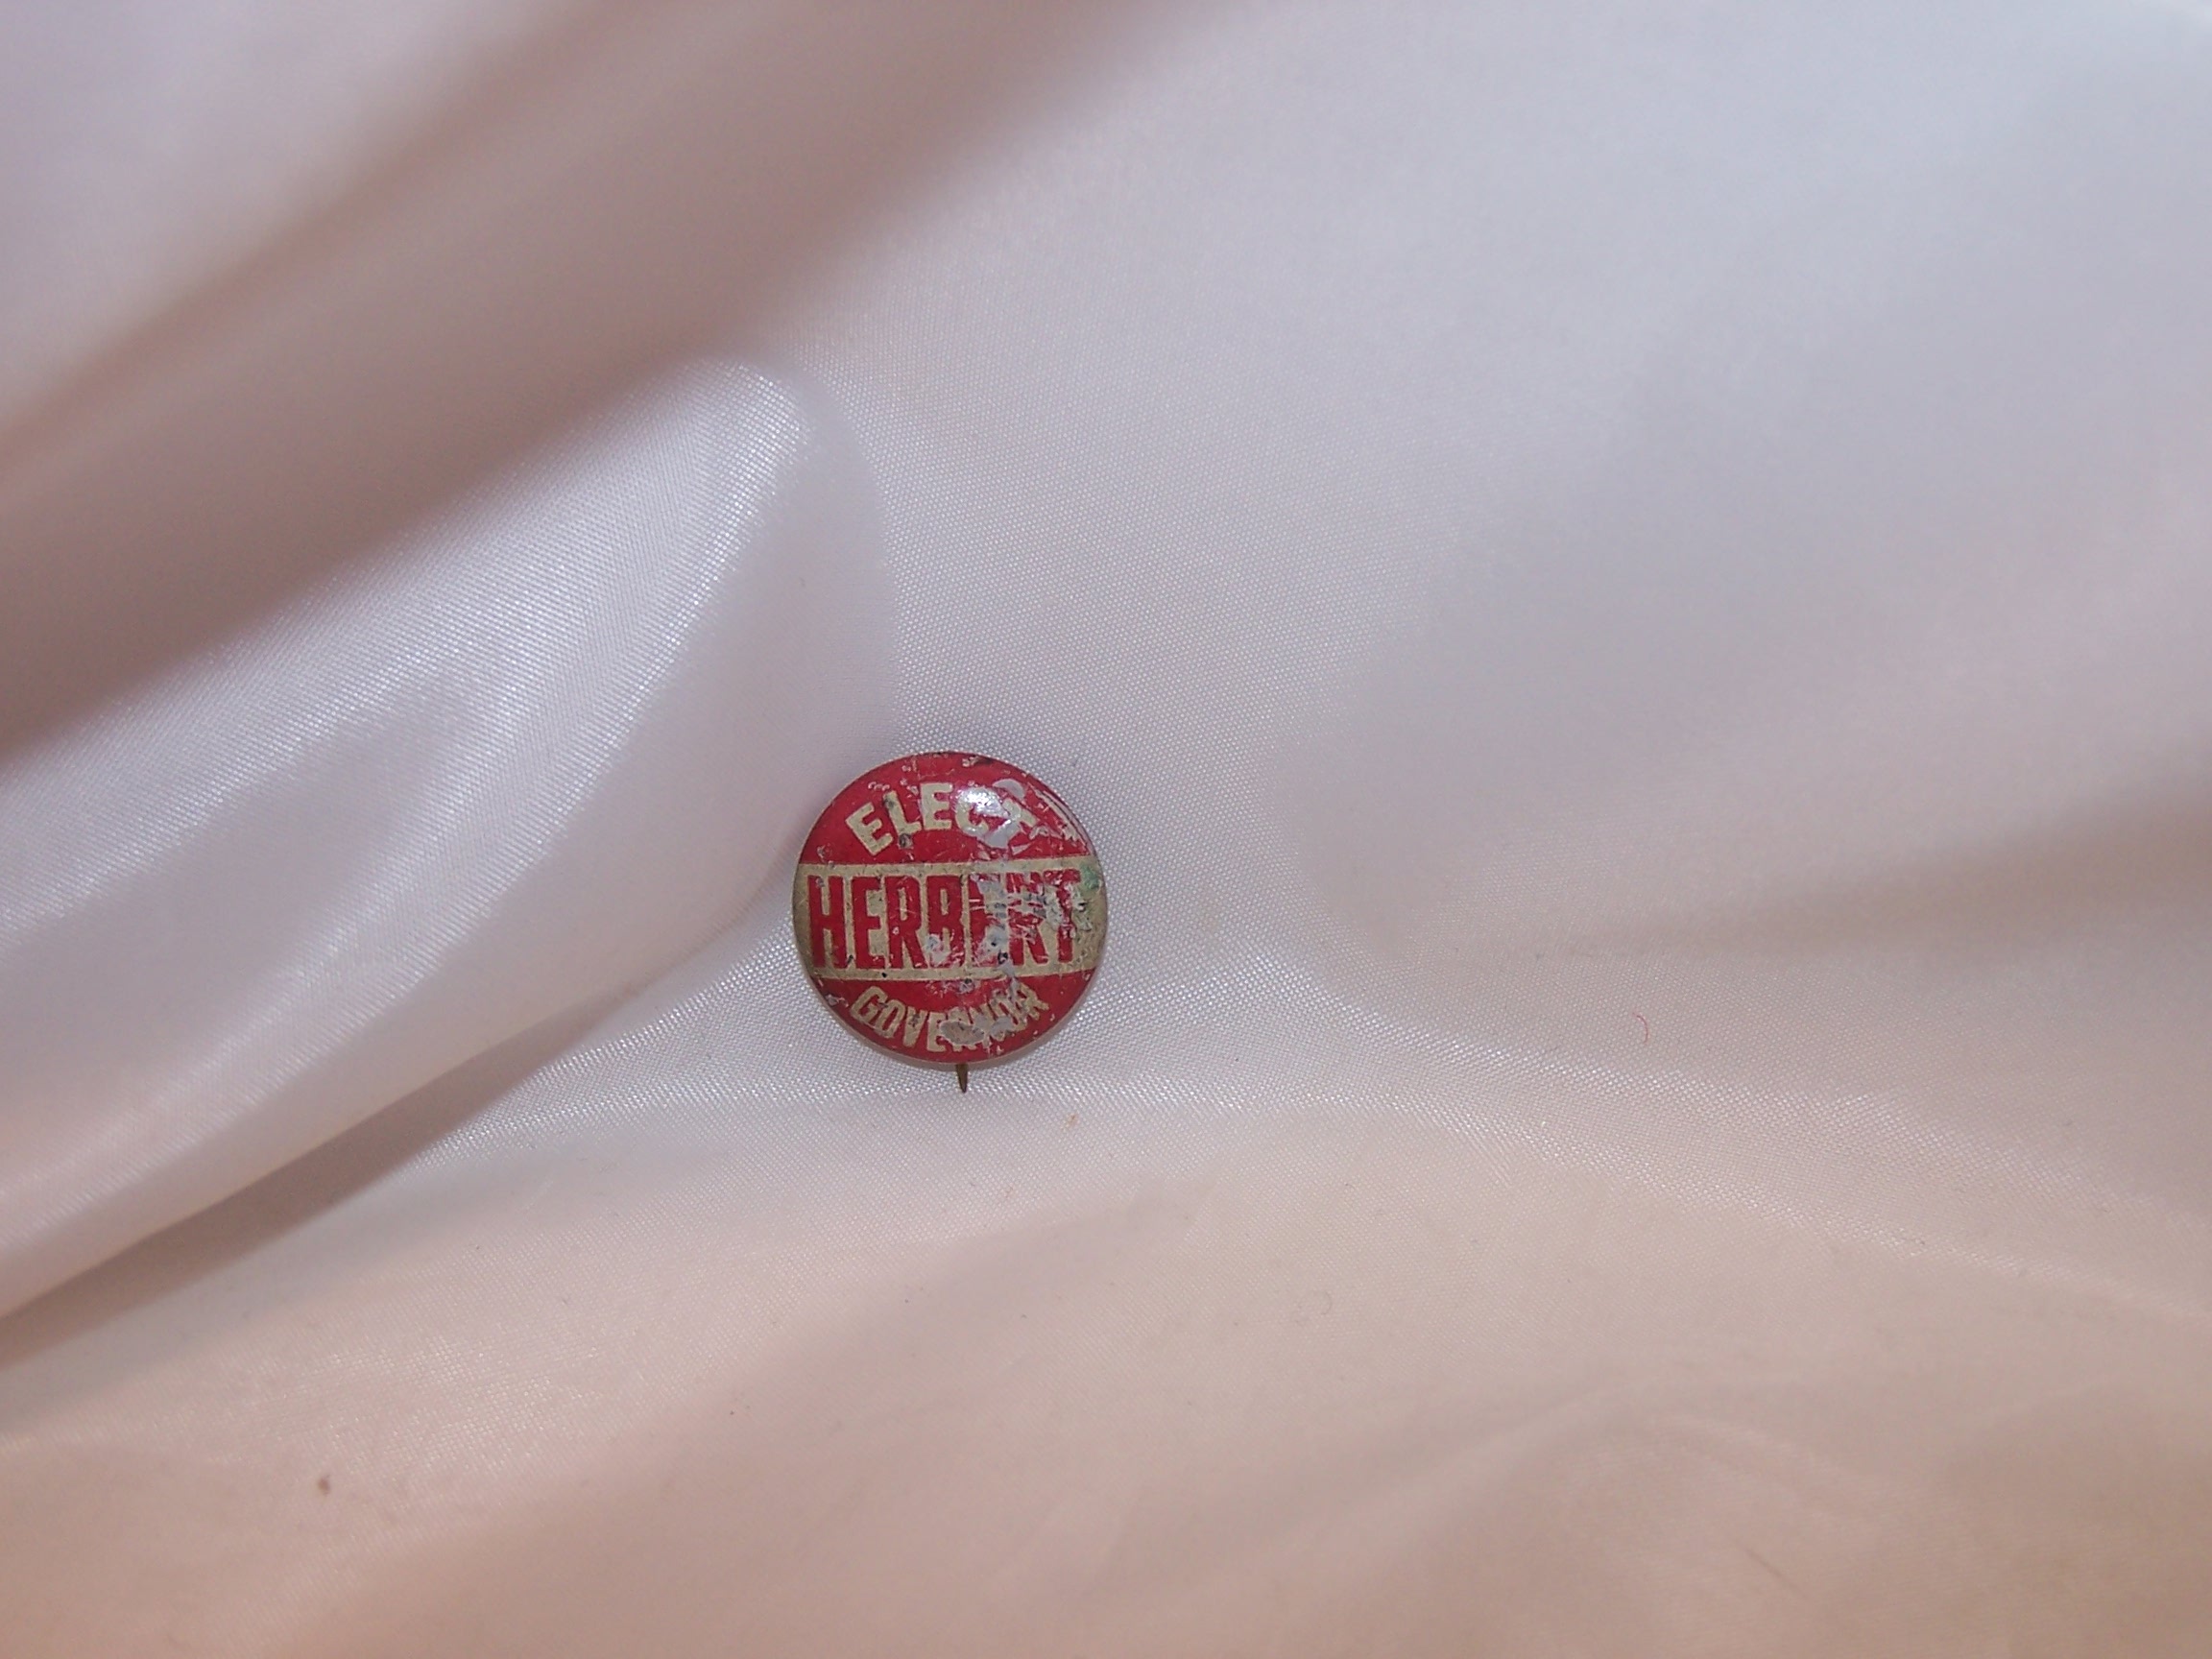 Herbert for Governor Election Pinback Button, Red and White